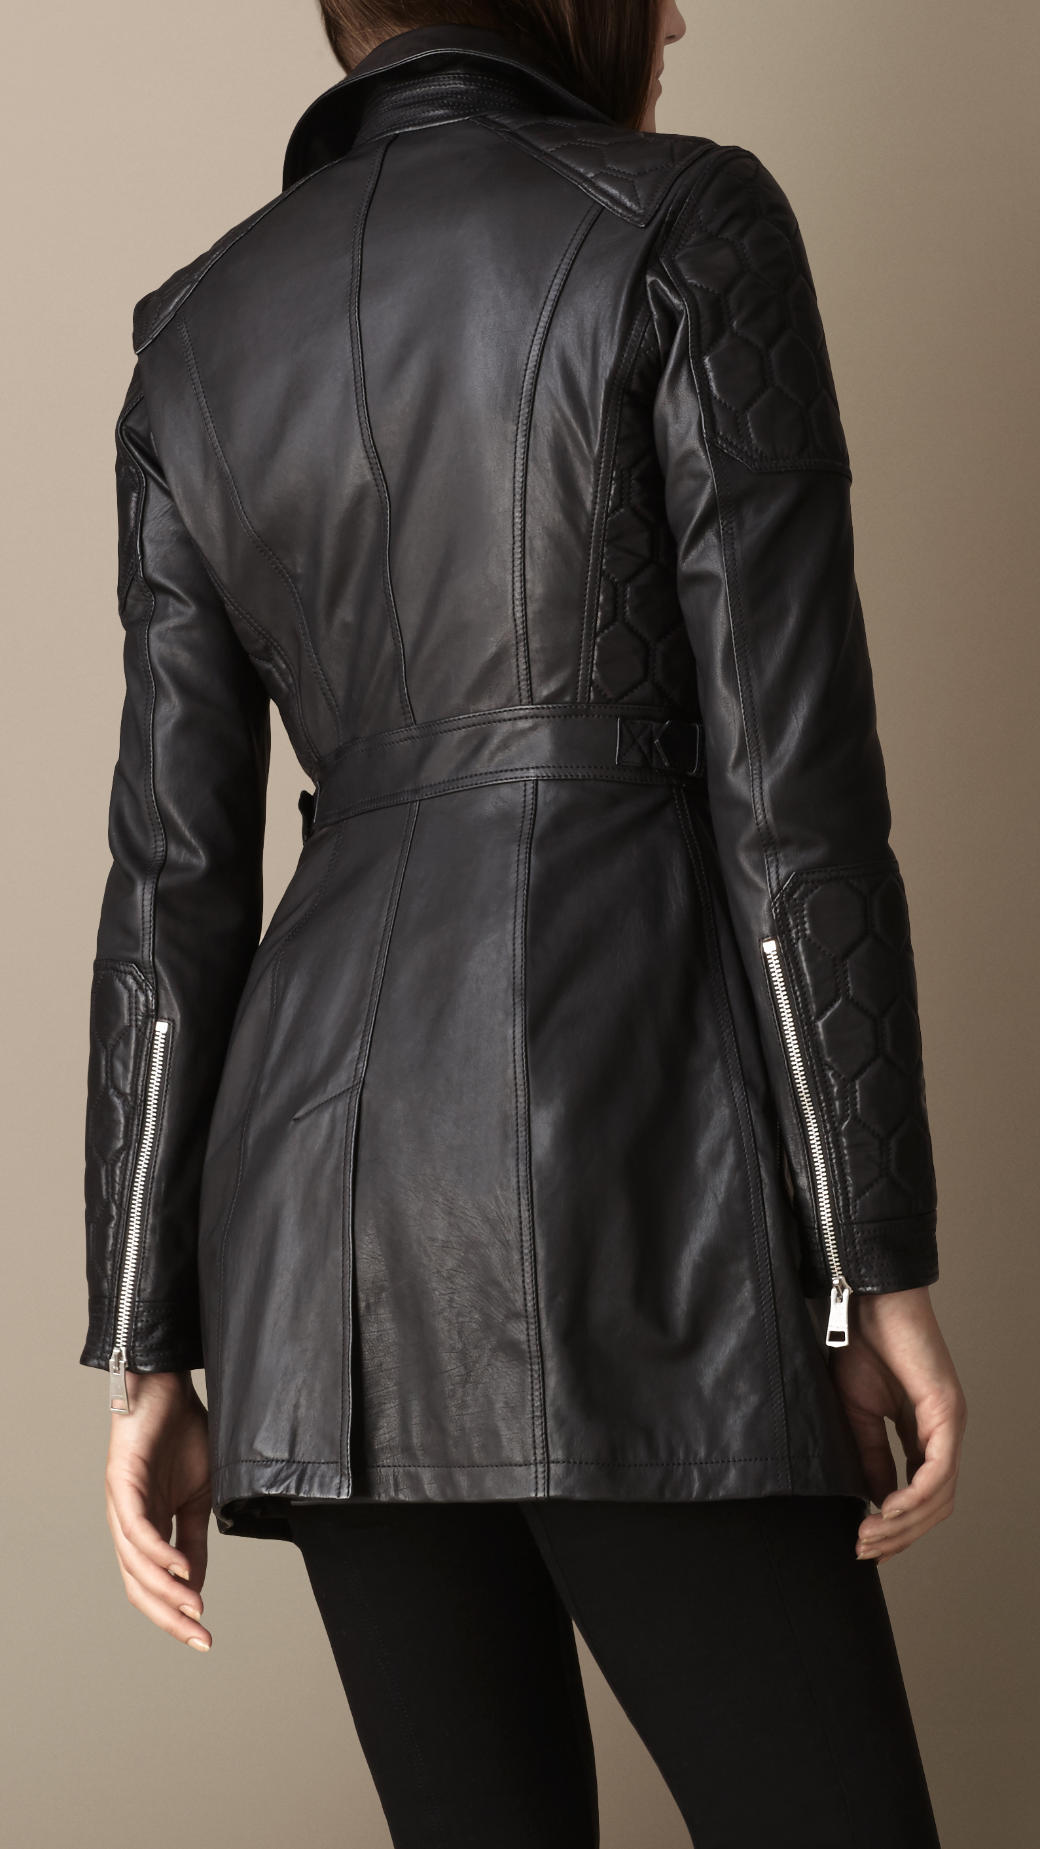 Burberry Leather Biker Trench Coat in Black - Lyst